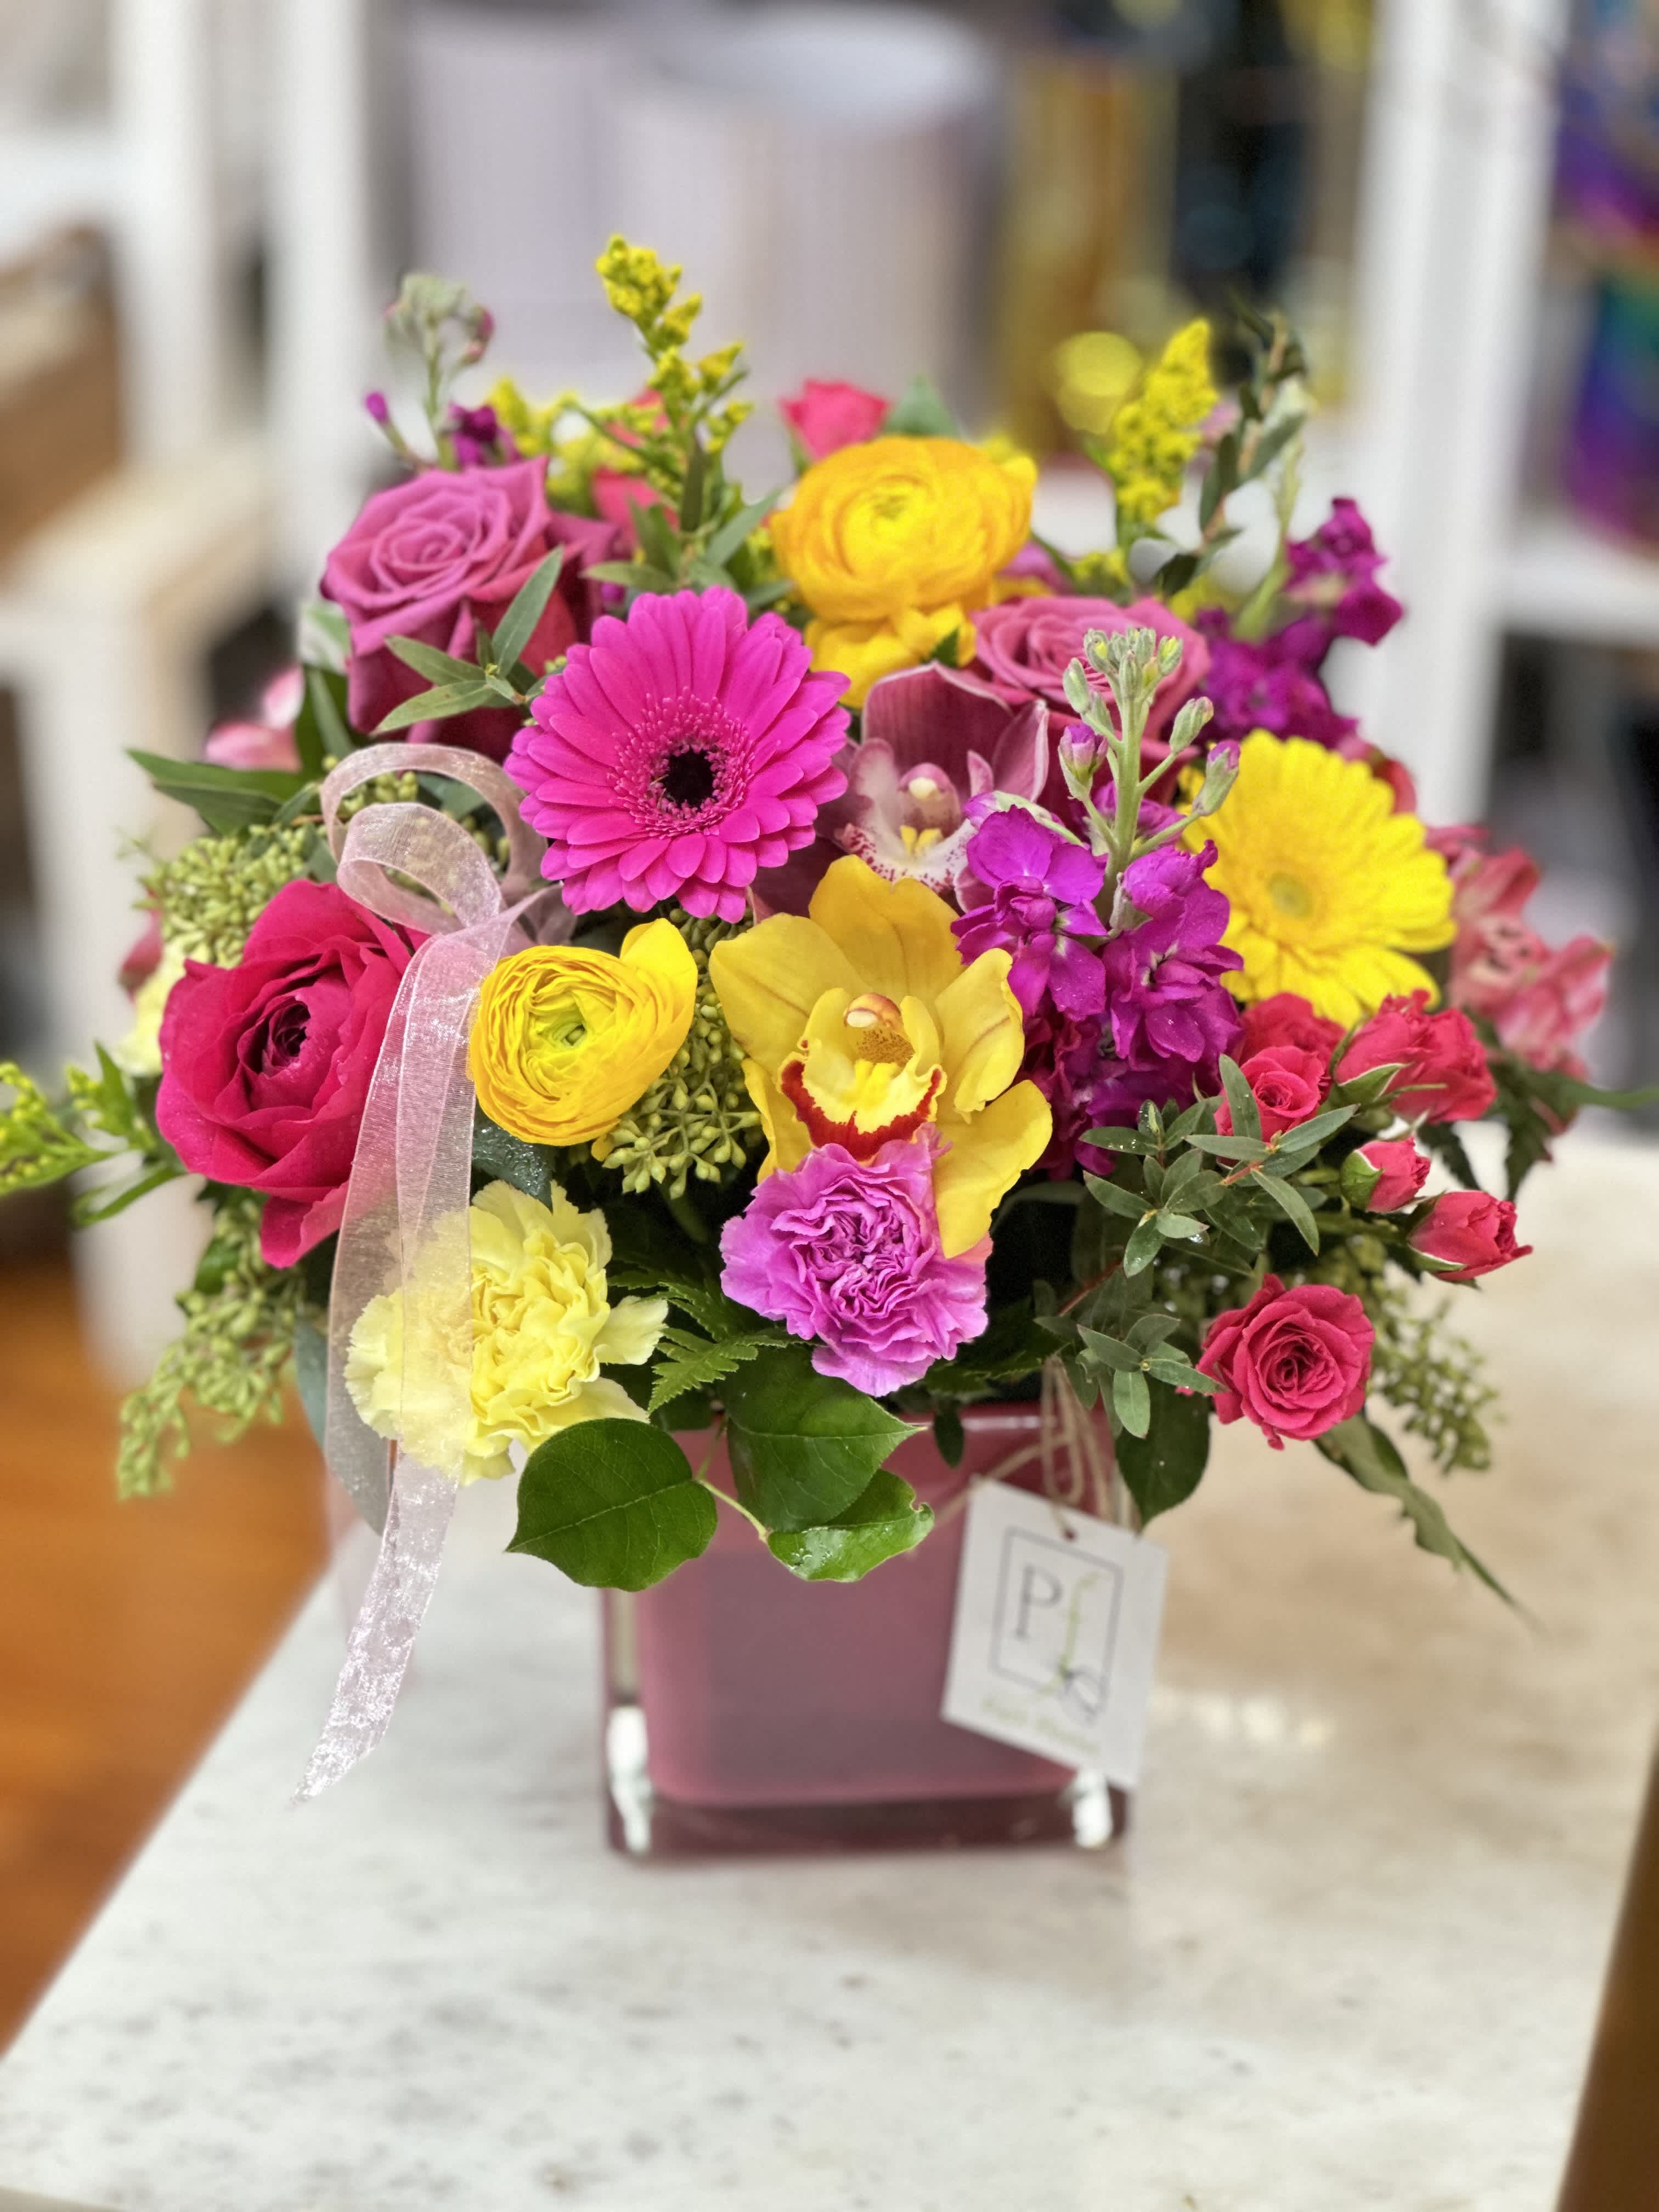 A Mother's Love - There's nothing that compares to a Mother's Love. The same can be said for this arrangement which contains a unique assortment of cymbidium orchids, roses, ranunculus, gerbera daisies, spray roses, carnations, and solidago. Show her how unique and special she is to you this Mother's Day season.